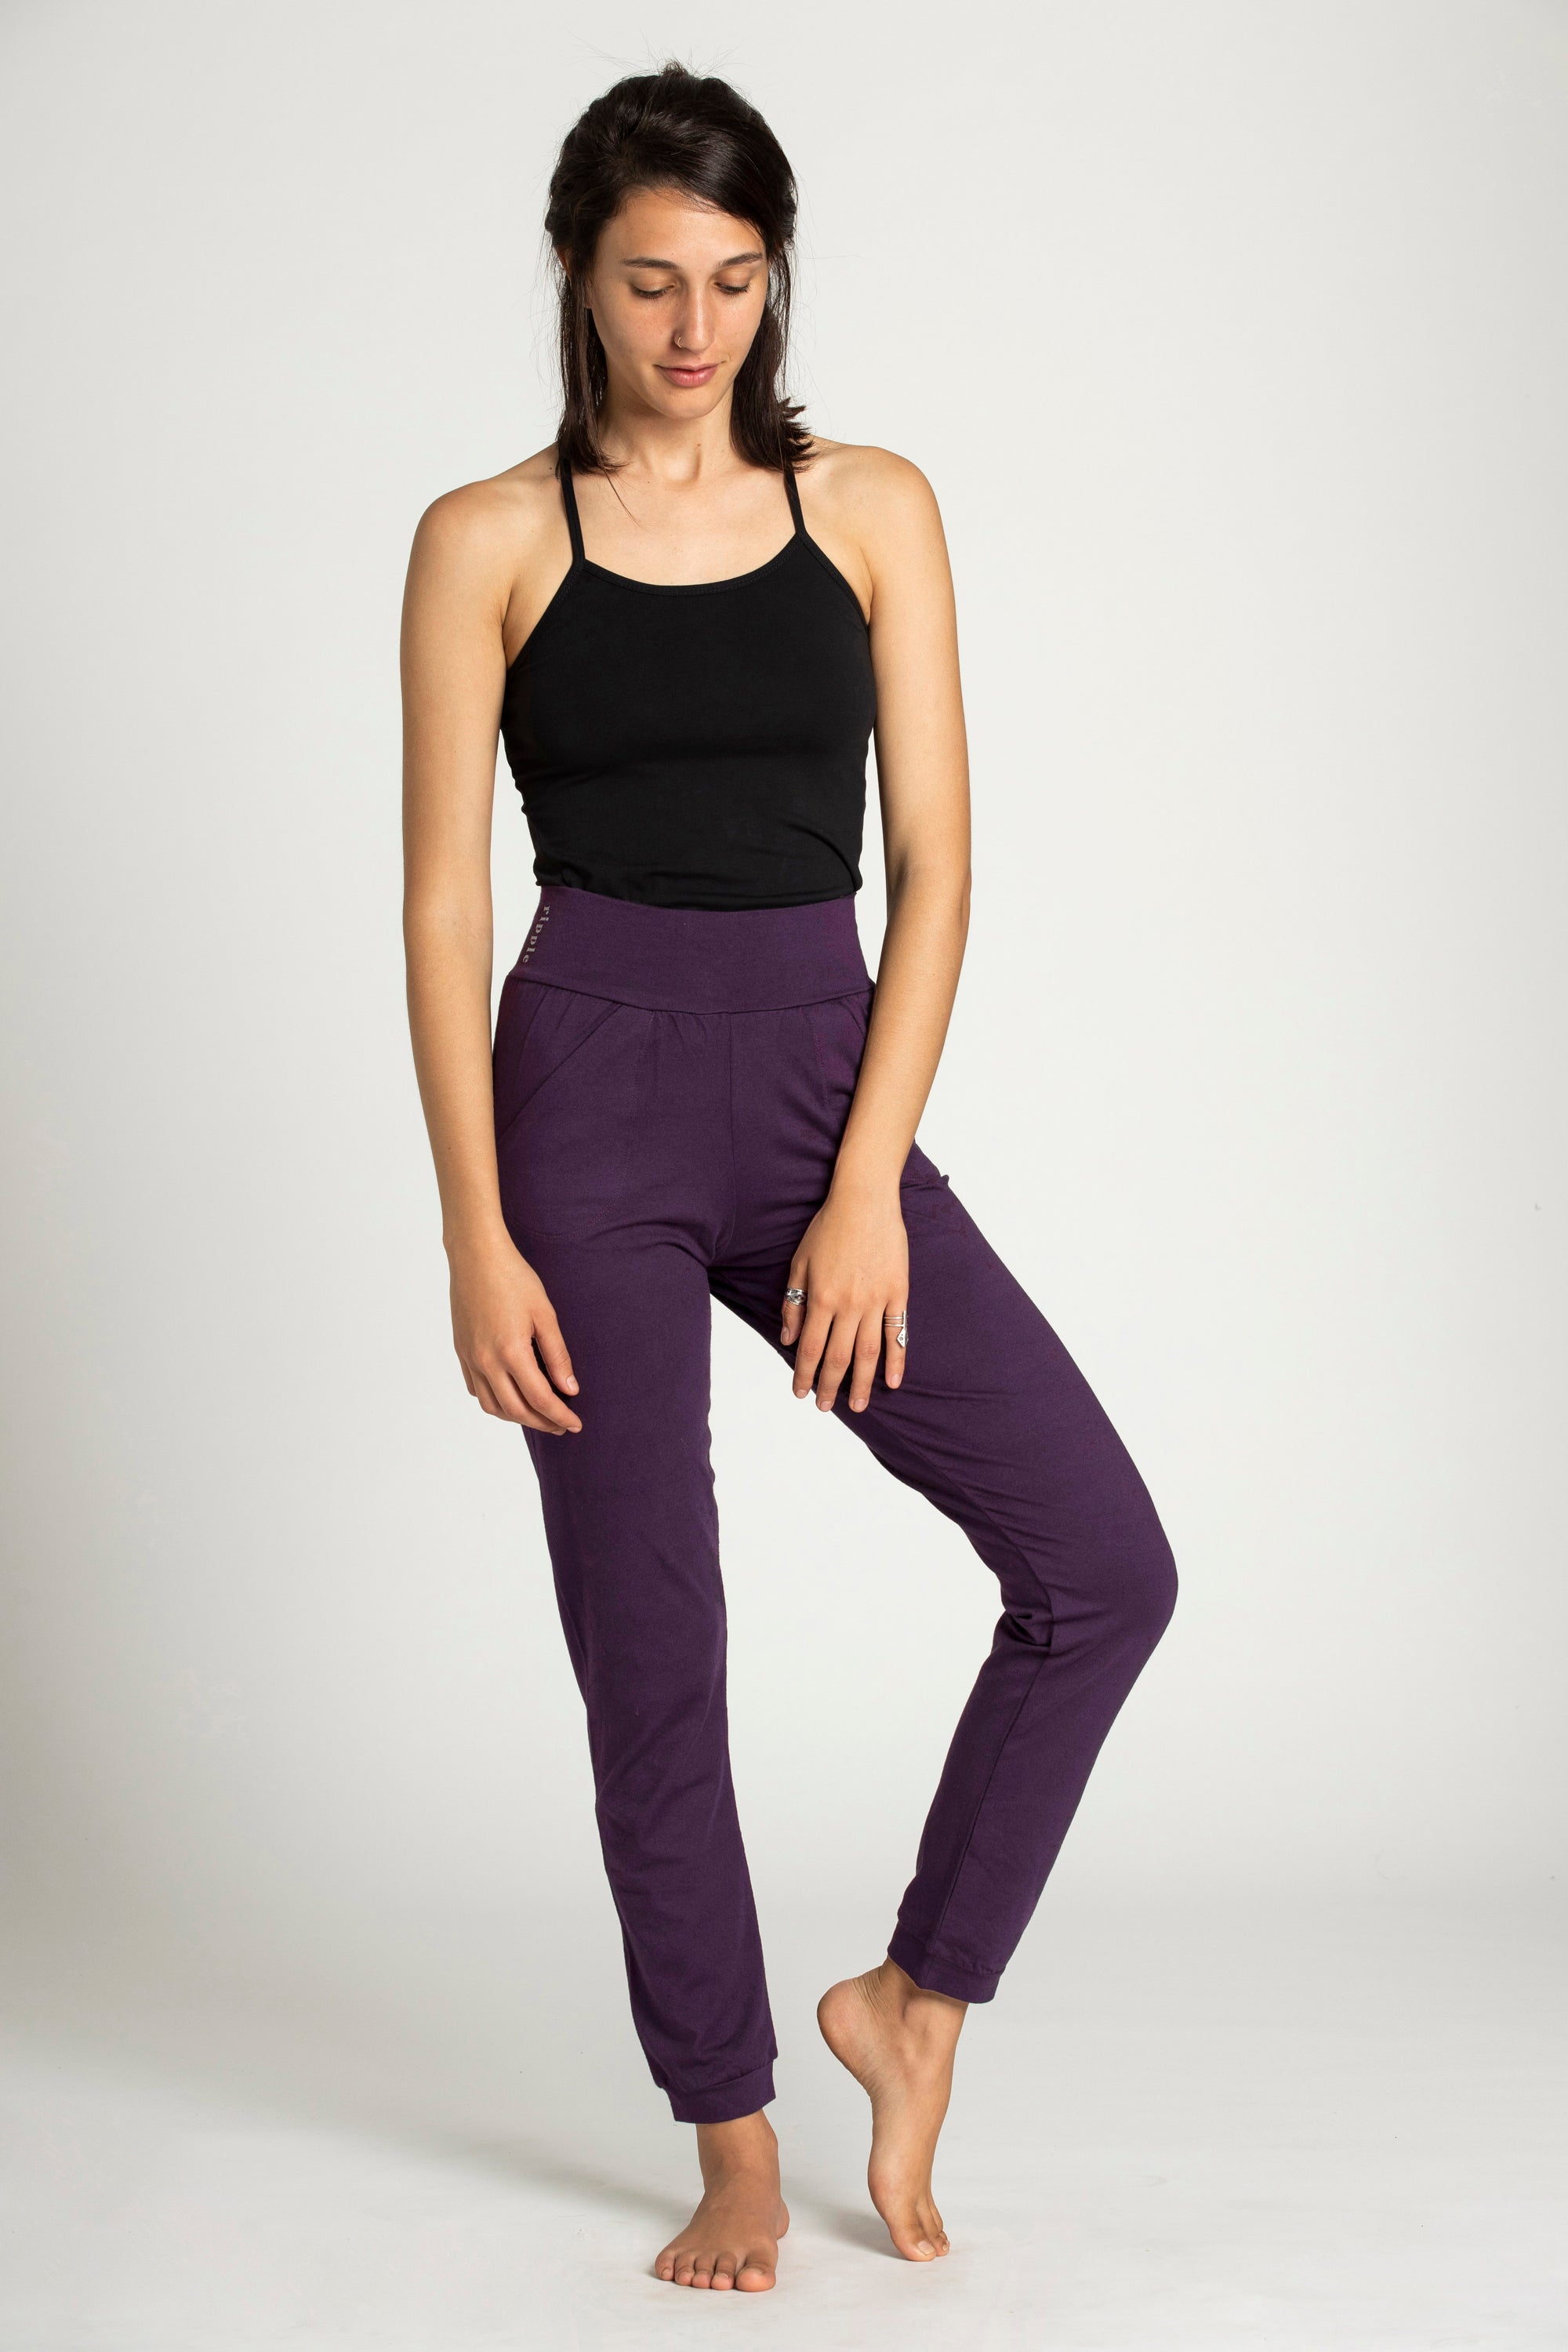 Ripple Yoga Wear - Dive into your poses in comfort with our Slouchy Unisex Yoga  Pants ♡ Made of soft modal fabric, they feature functional side pockets and  a wide waistband to